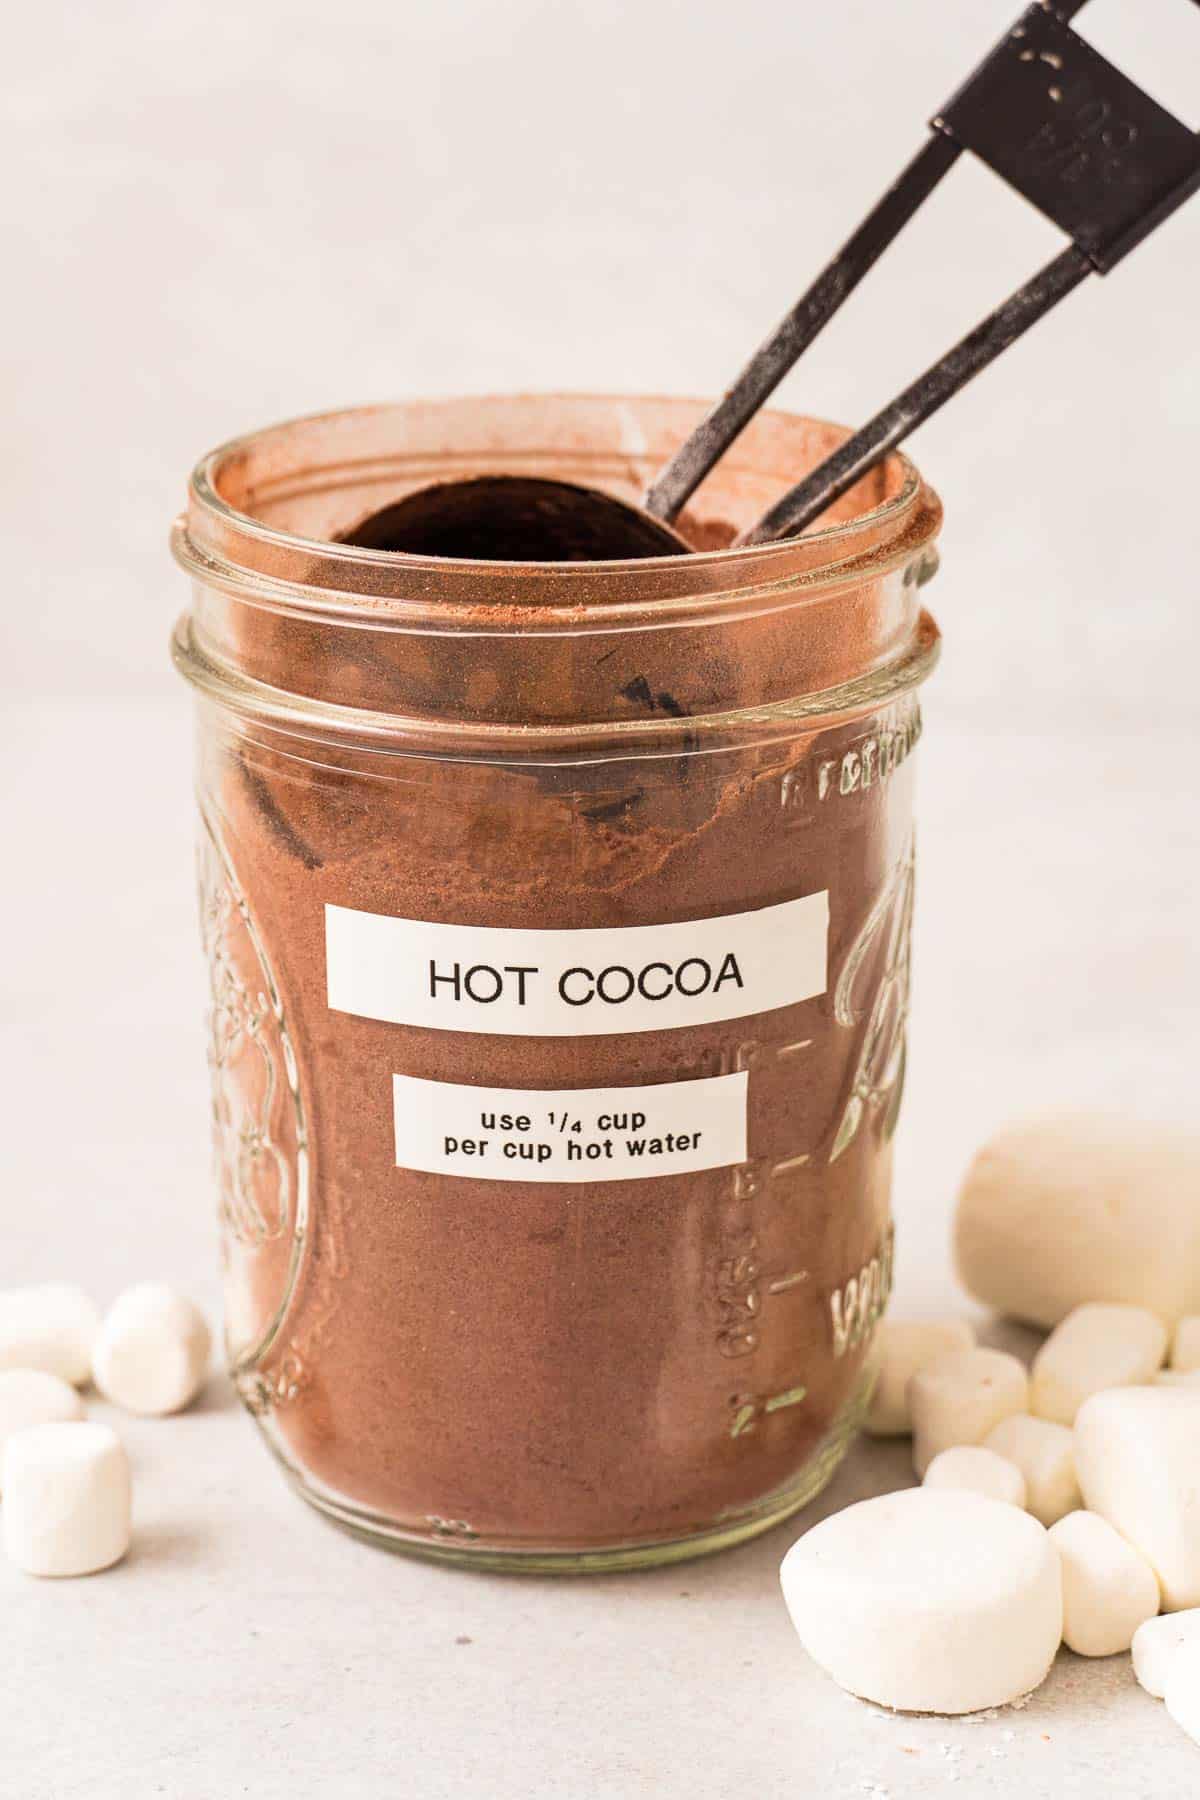 A mason jar with hot cocoa and a ¼ cup scoop inside. The label reads “hot cocoa, use ¼ cup hot cocoa per cup hot water.”